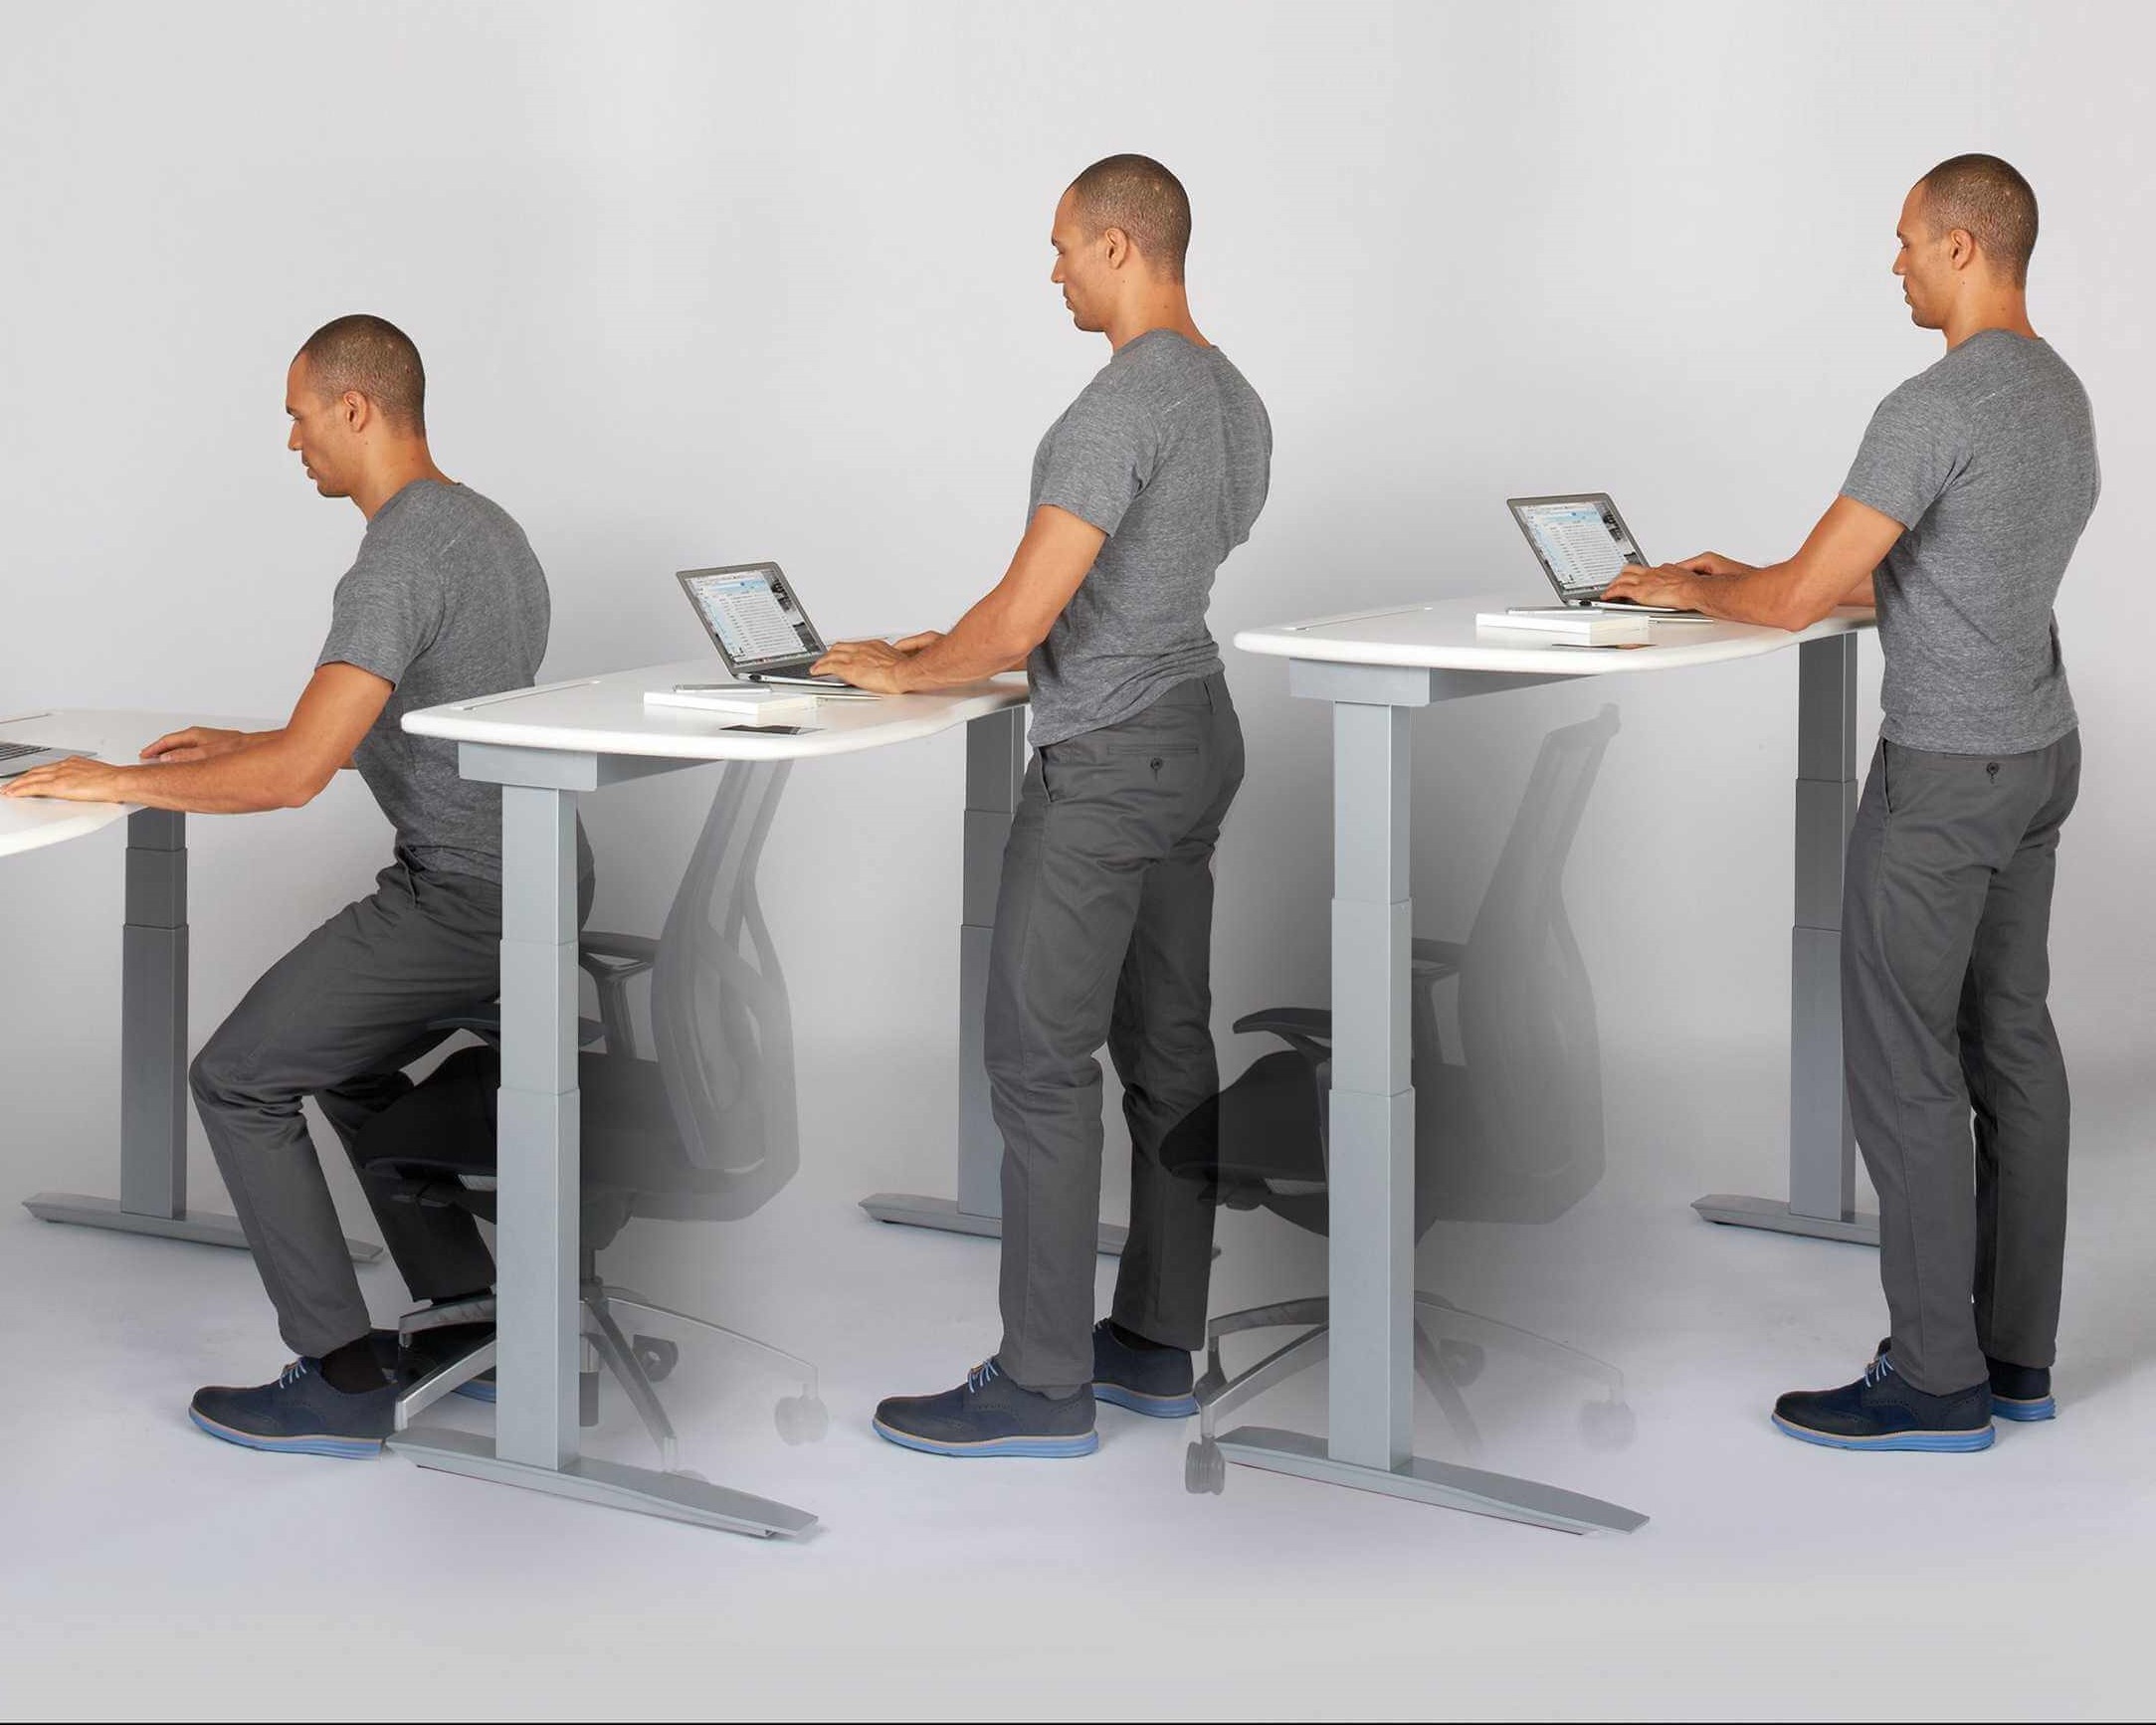 STANDING IS THE NEW SITTING AT THE APPLE PARK